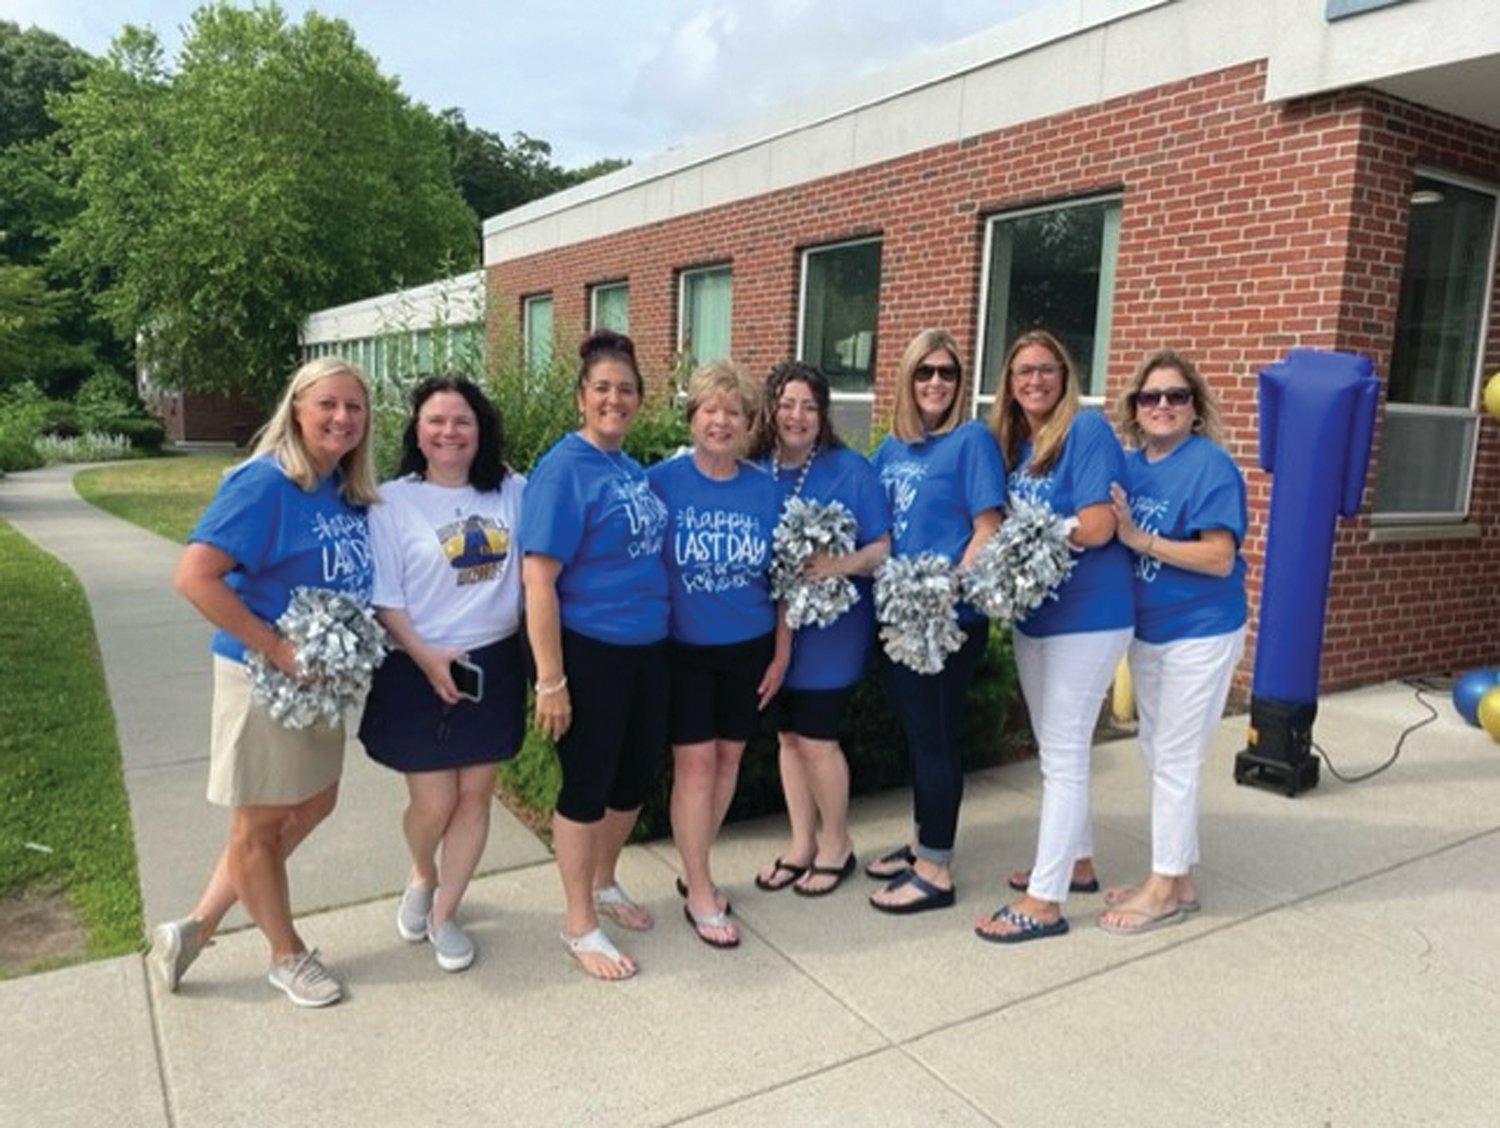 SUPER STAFF: Among the many teachers and staff that made the last day of Winsor Hill School’s 2021-2022 year special was: Susan Parillo, Judy Centracchio, Donna Pingitore, Margy Aiello, Nicole Moccia, Melinda Izzo, Dina Needham and Doreen Hudson.